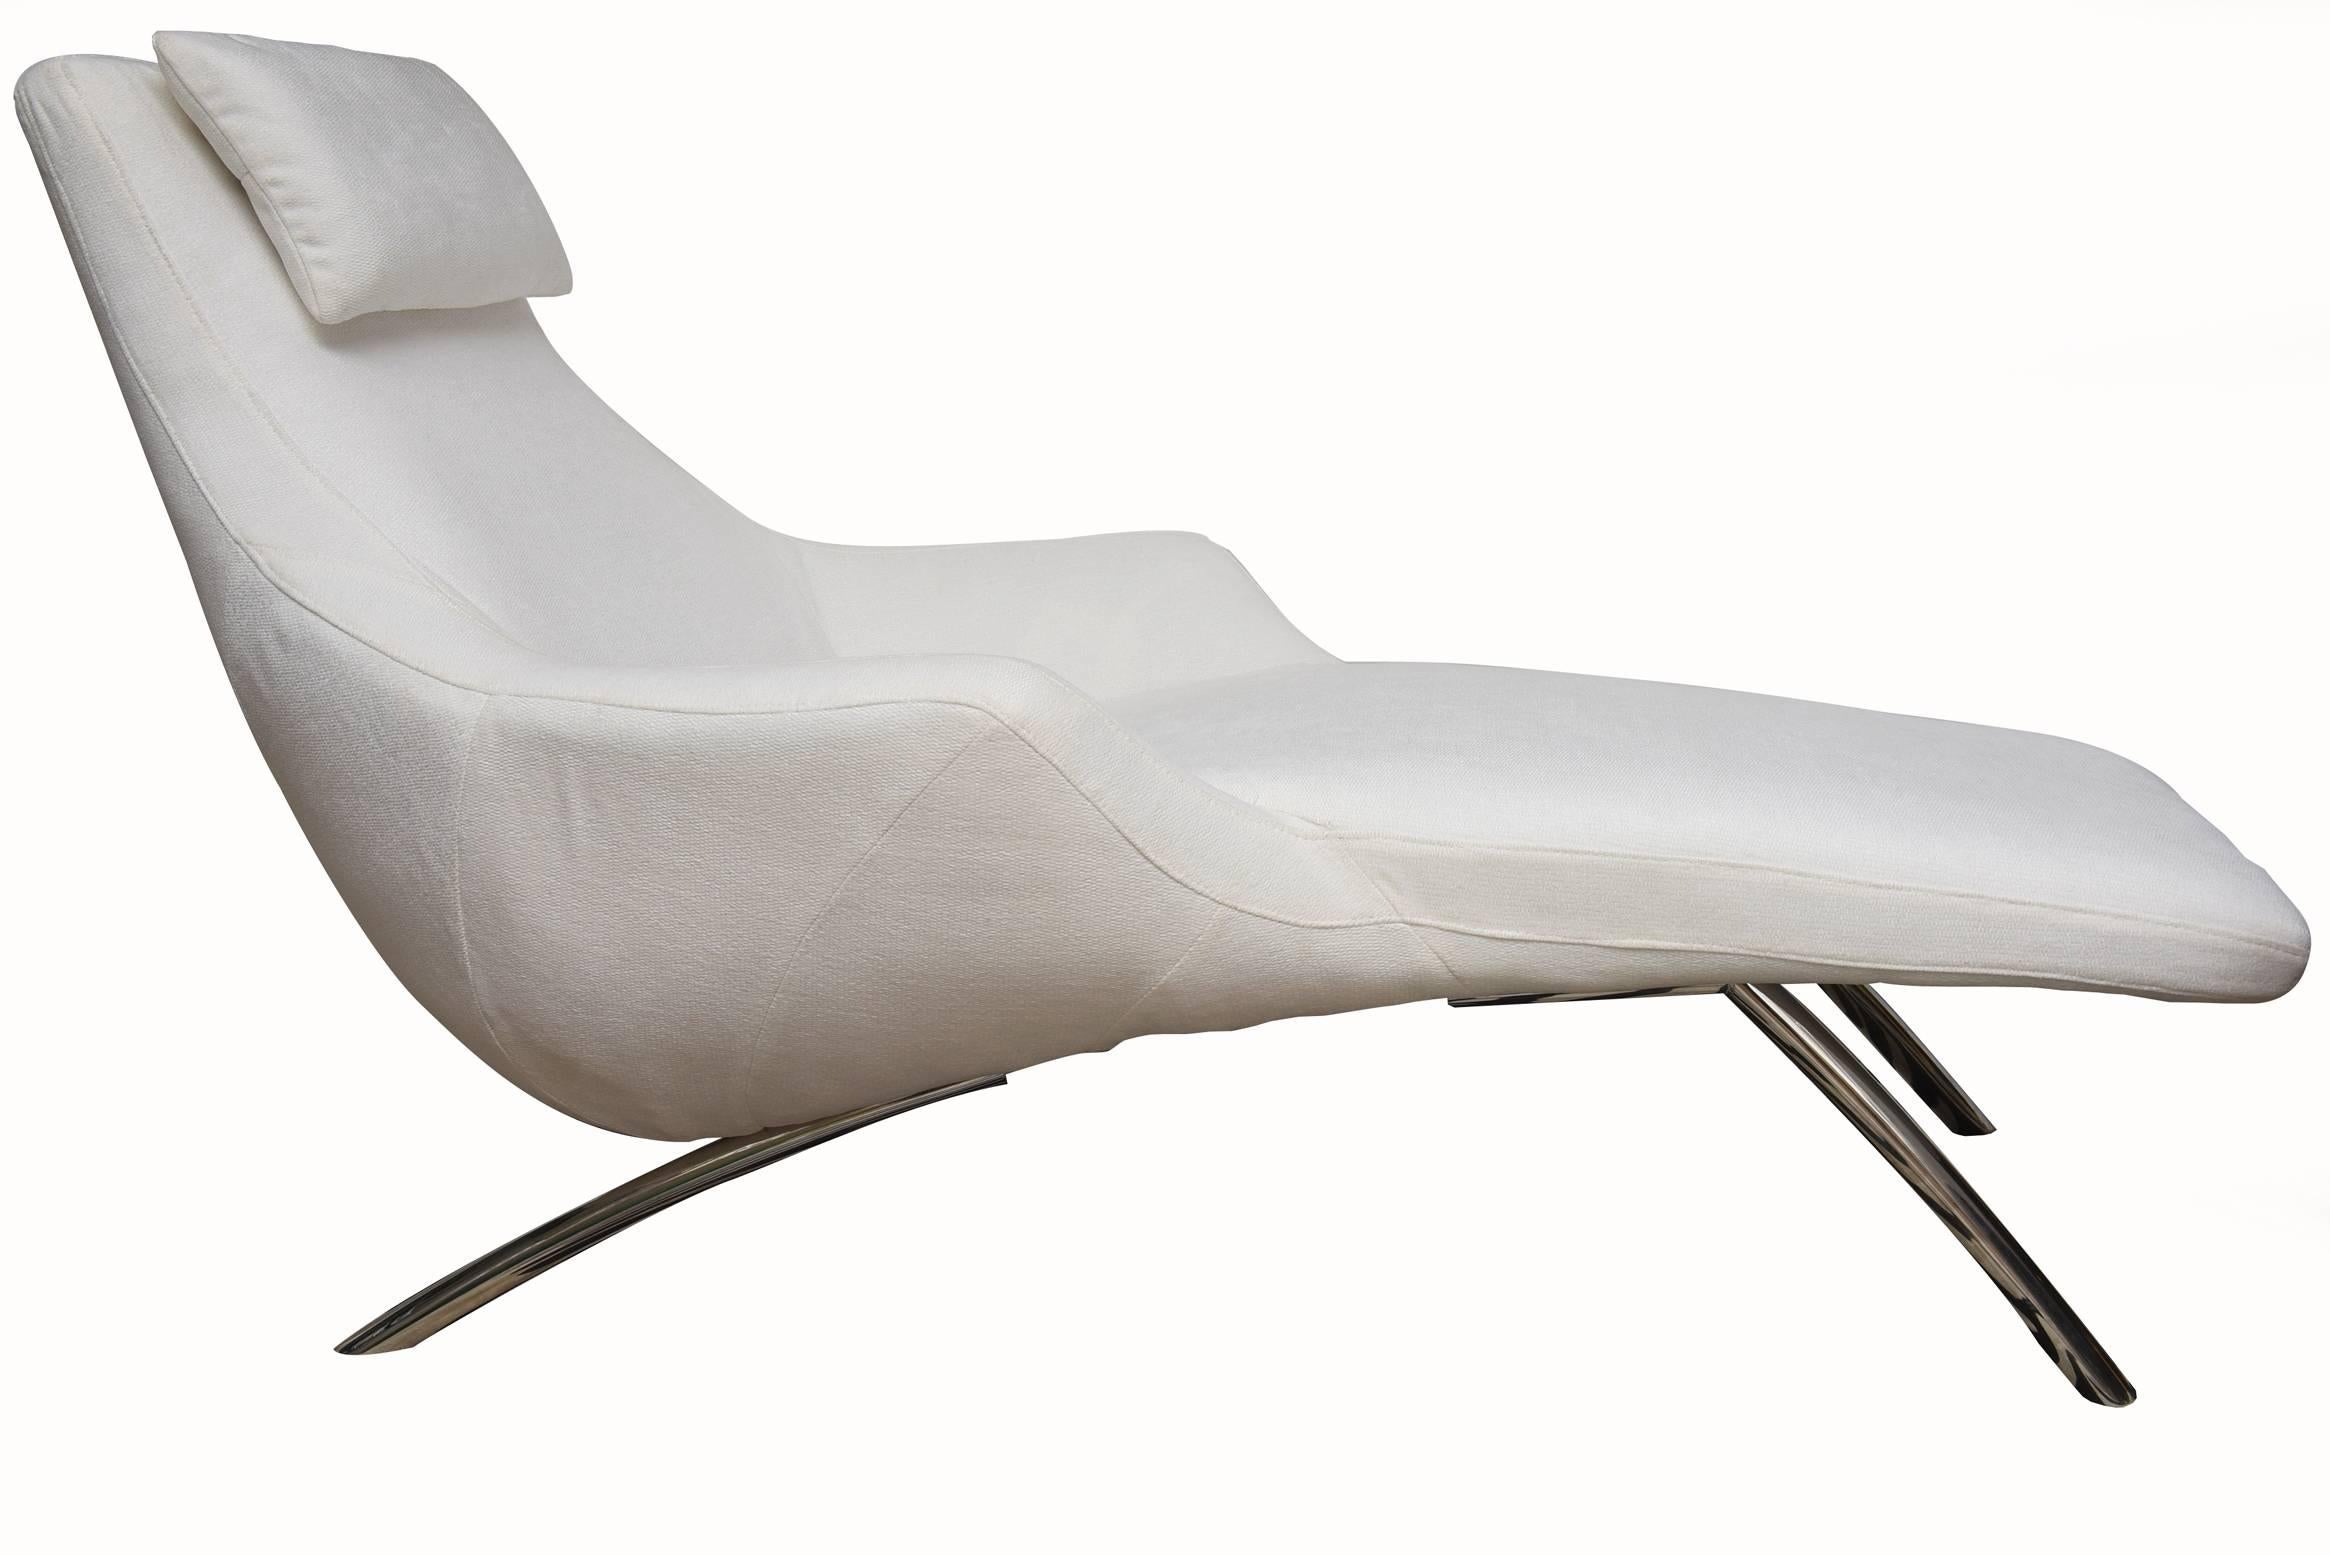 Late 20th Century Moderne Sculptural Stainless Steel and Upholstered Kagan Style Chaise Lounge